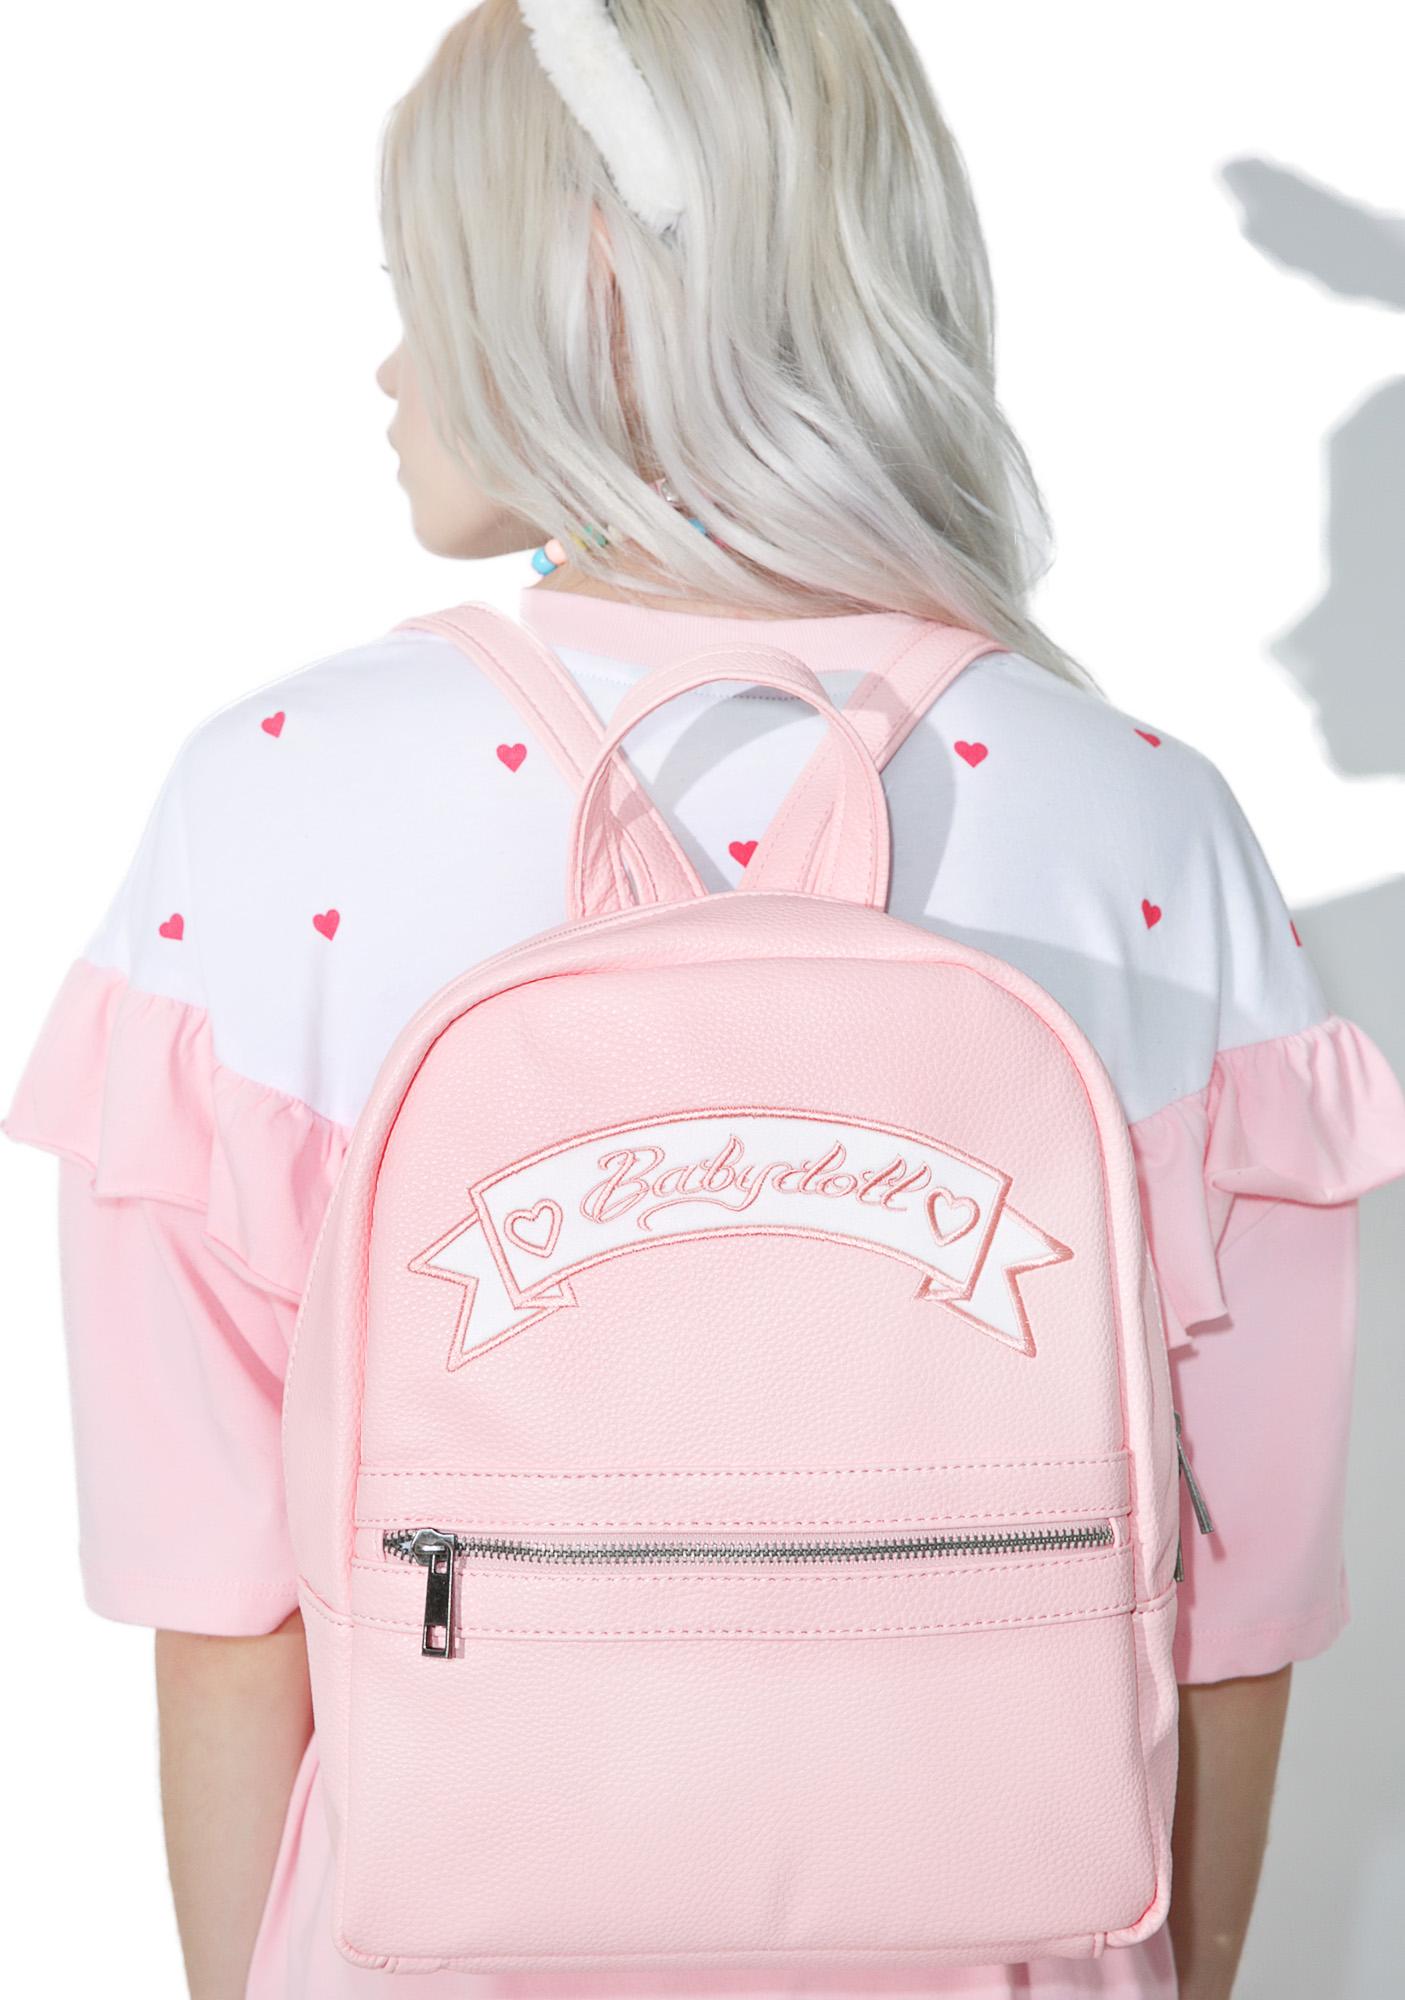 baby doll with backpack